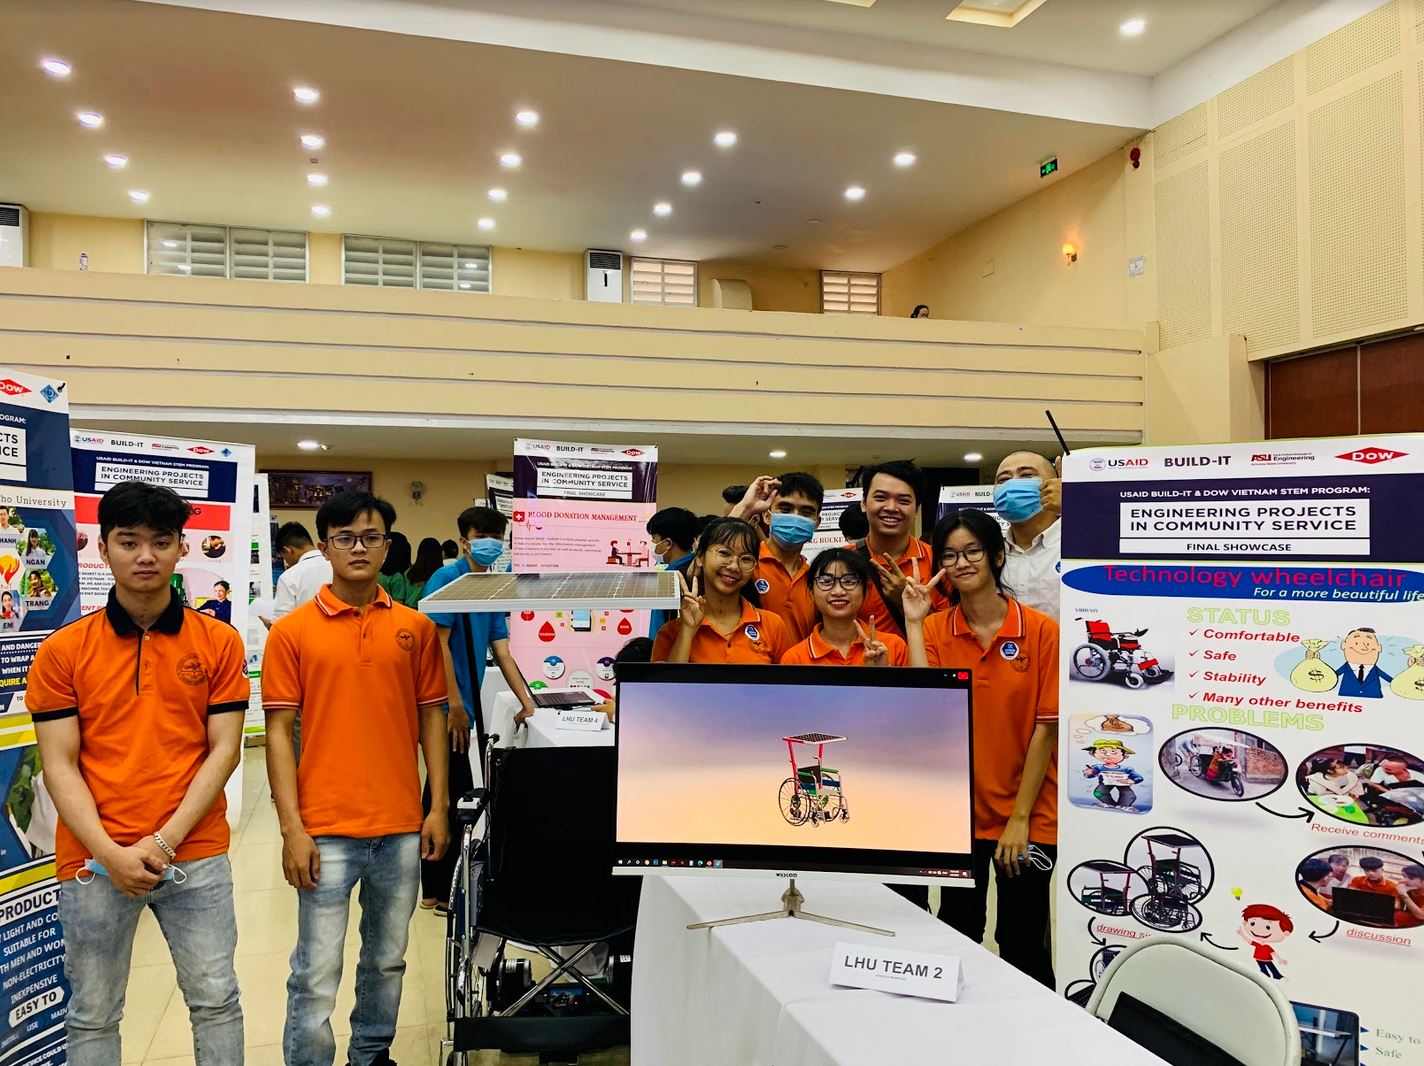 Members of the AutoMov team present their solution at the 2021 EPICS Final Showcase. Photo courtesy of Dr. Van Dinh Vy Phuong